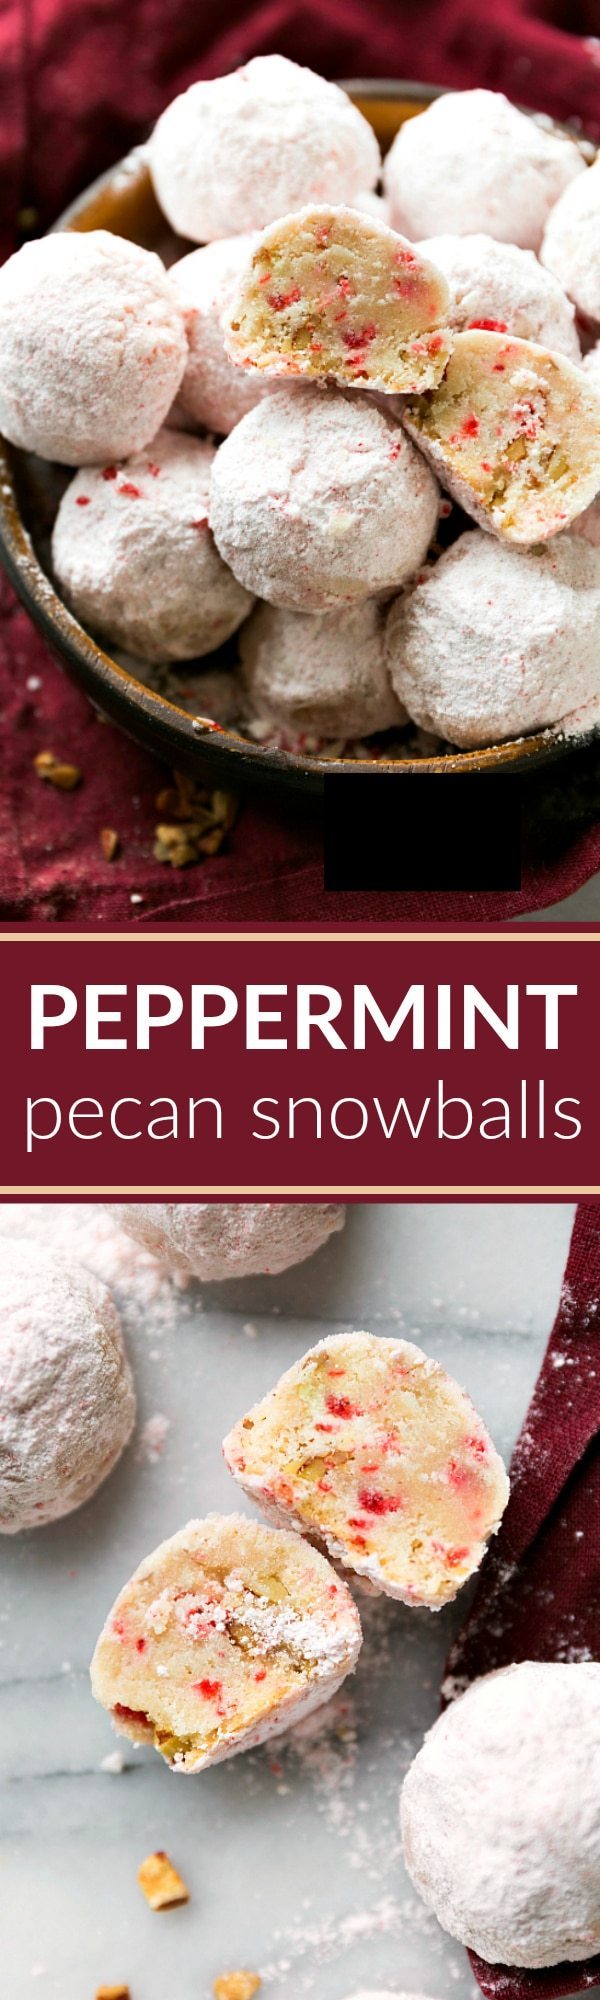 EASY PEPPERMINT PECAN SNOWBALLS! Easy to make snowball cookies with crushed peppermint and pecans. Recipe from chelseasmessyapron.com